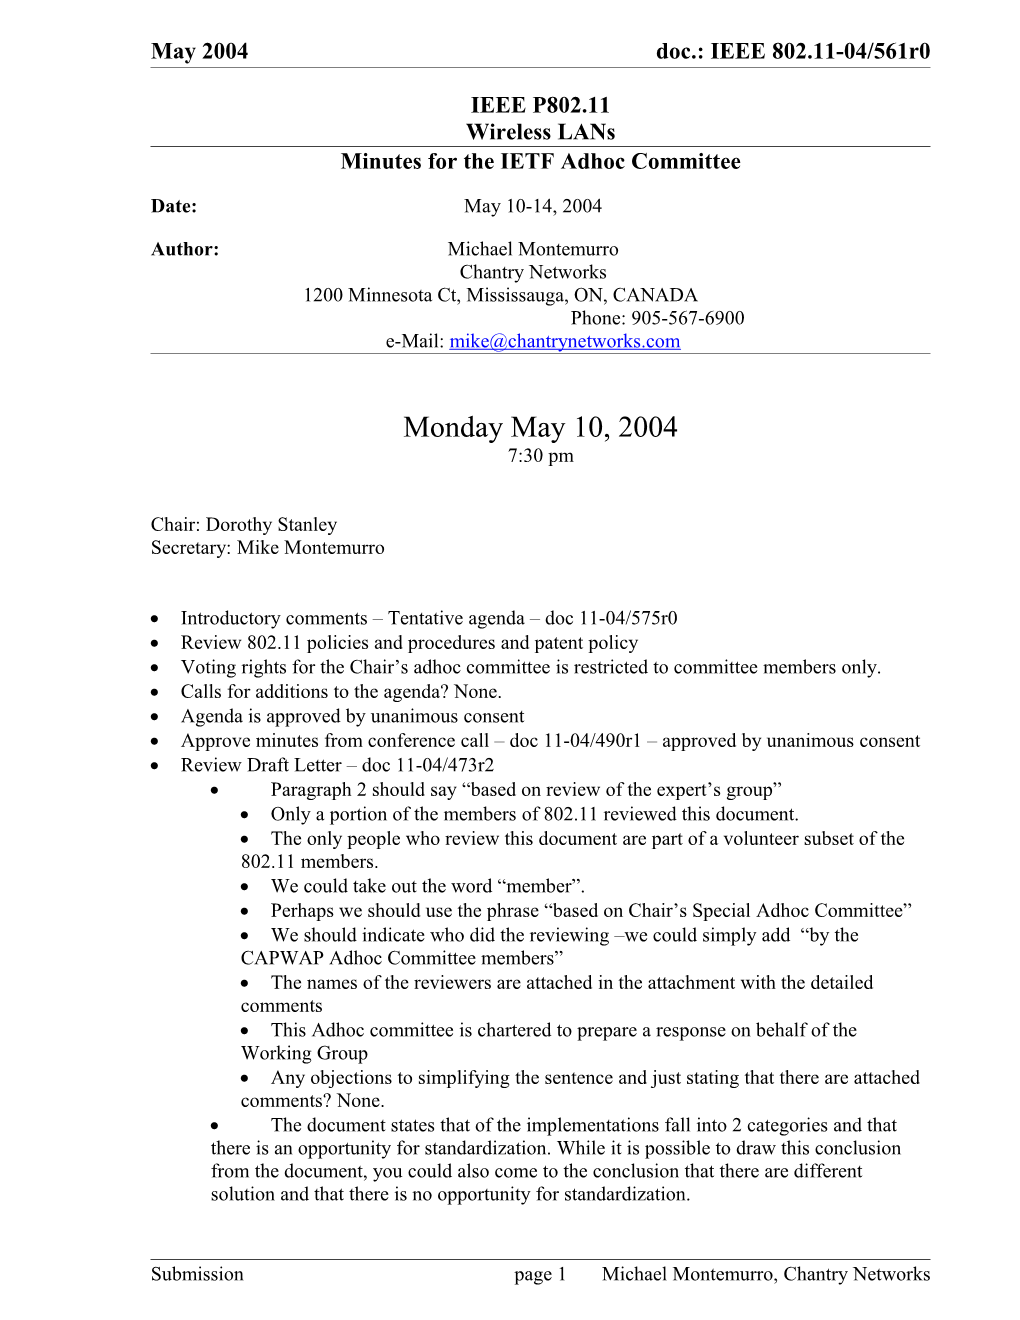 Minutes for the IETF Adhoc Committee